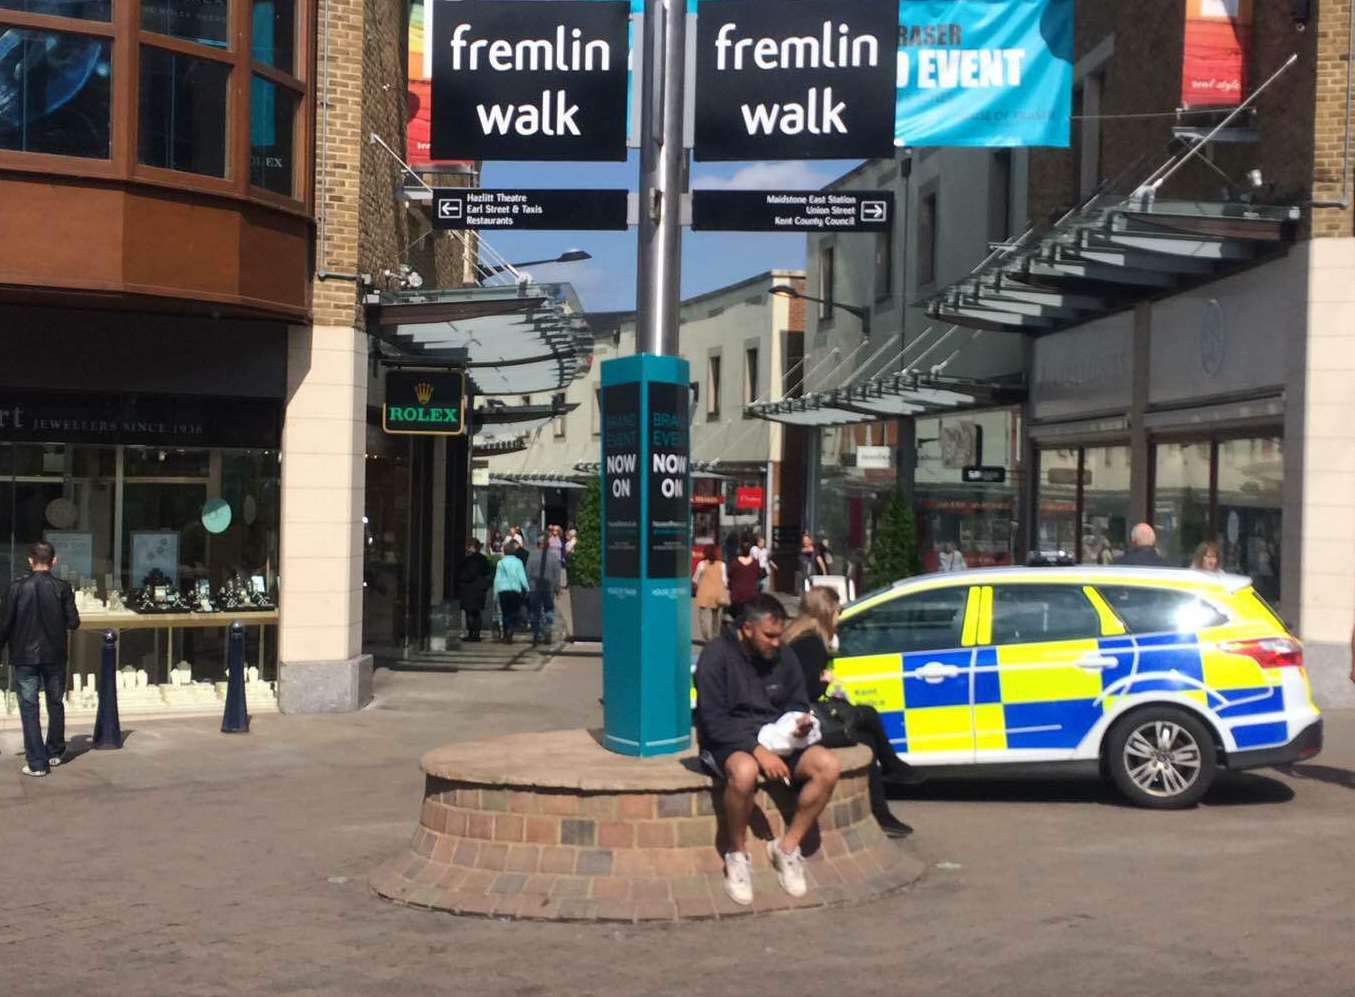 Police at the entrance to Fremlin Walk